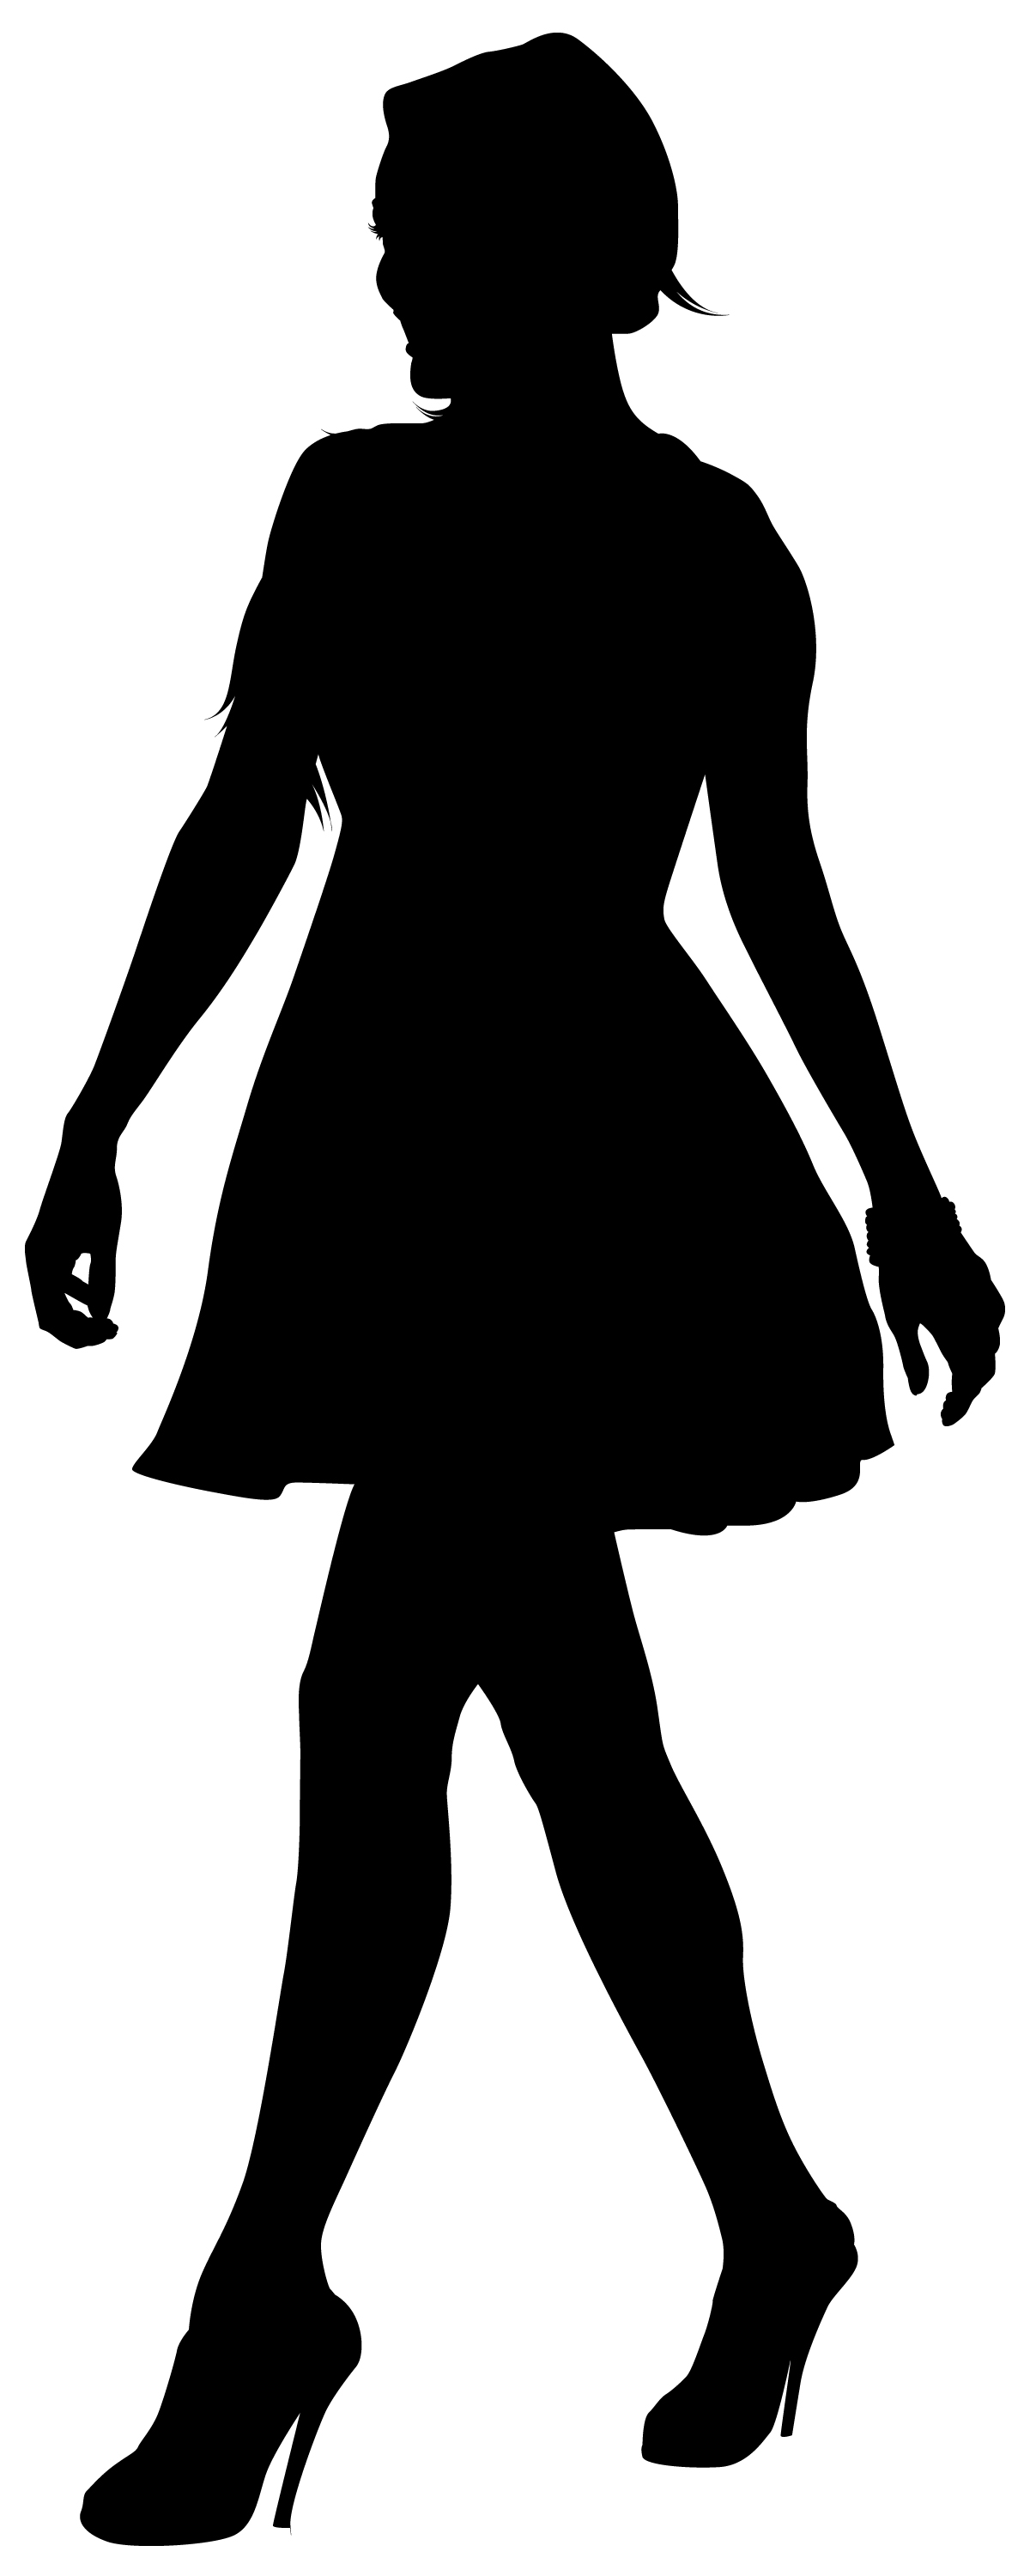 Free Silhouette Of Women, Download Free Silhouette Of Women png images